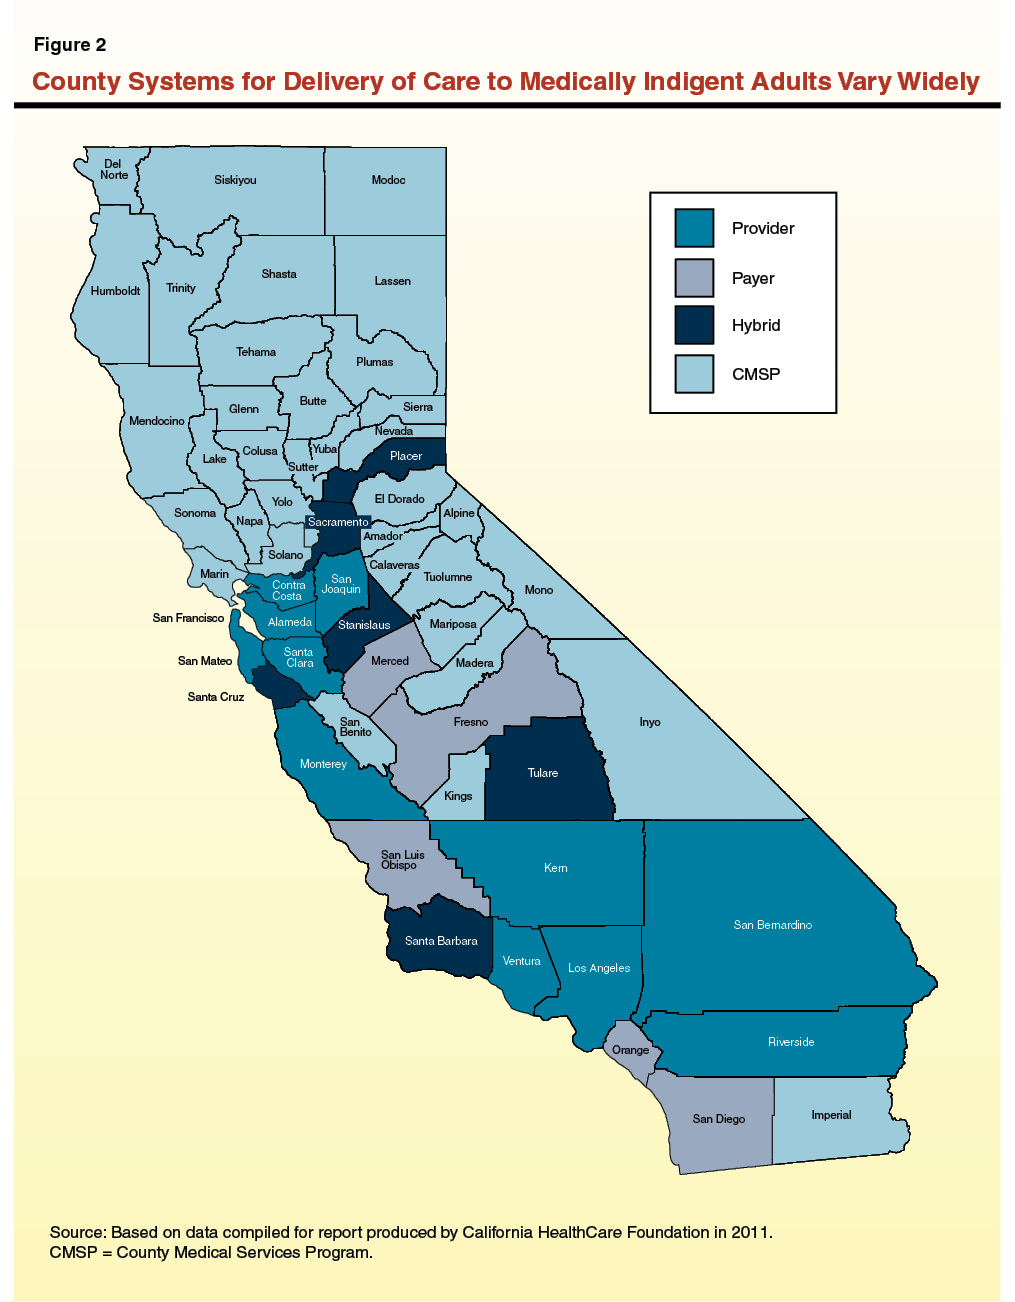 County Systems for Delivery of Care to Medically Indigent Adults Vary Widely